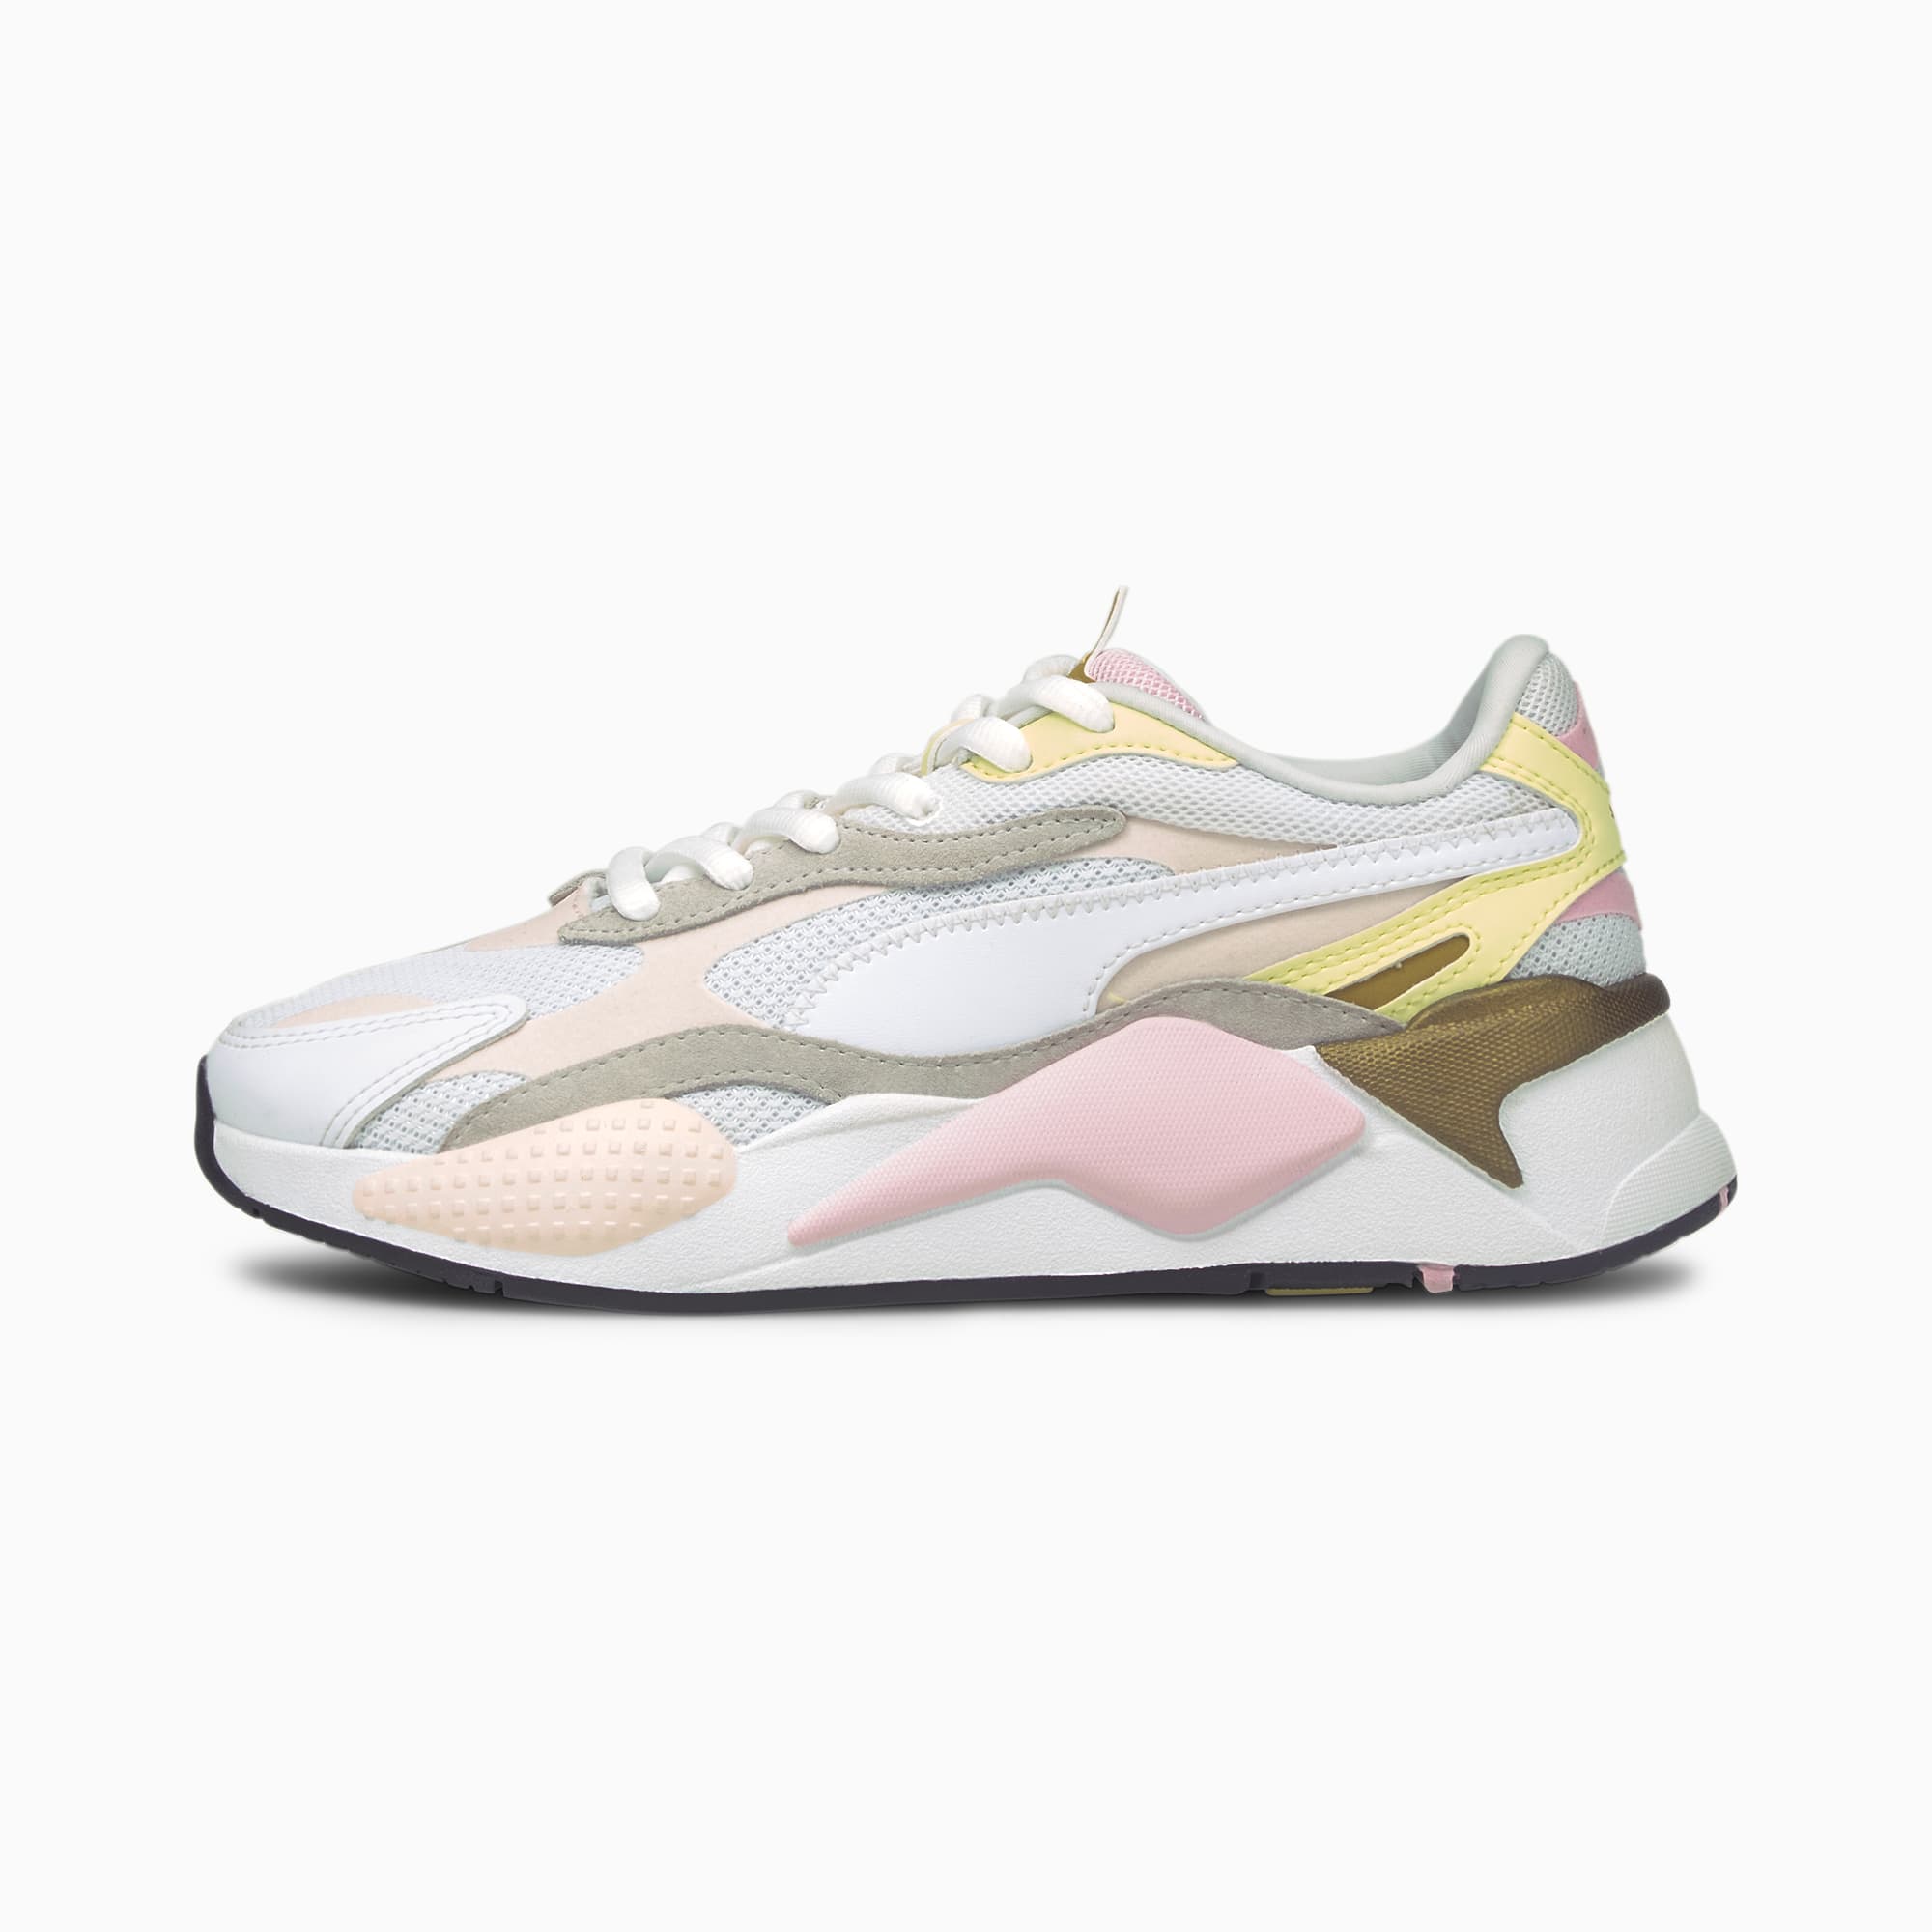 RS-X³ Puzzle V2 sneakers, Roze/Geel/Wit, Maat 42,5 | PUMA